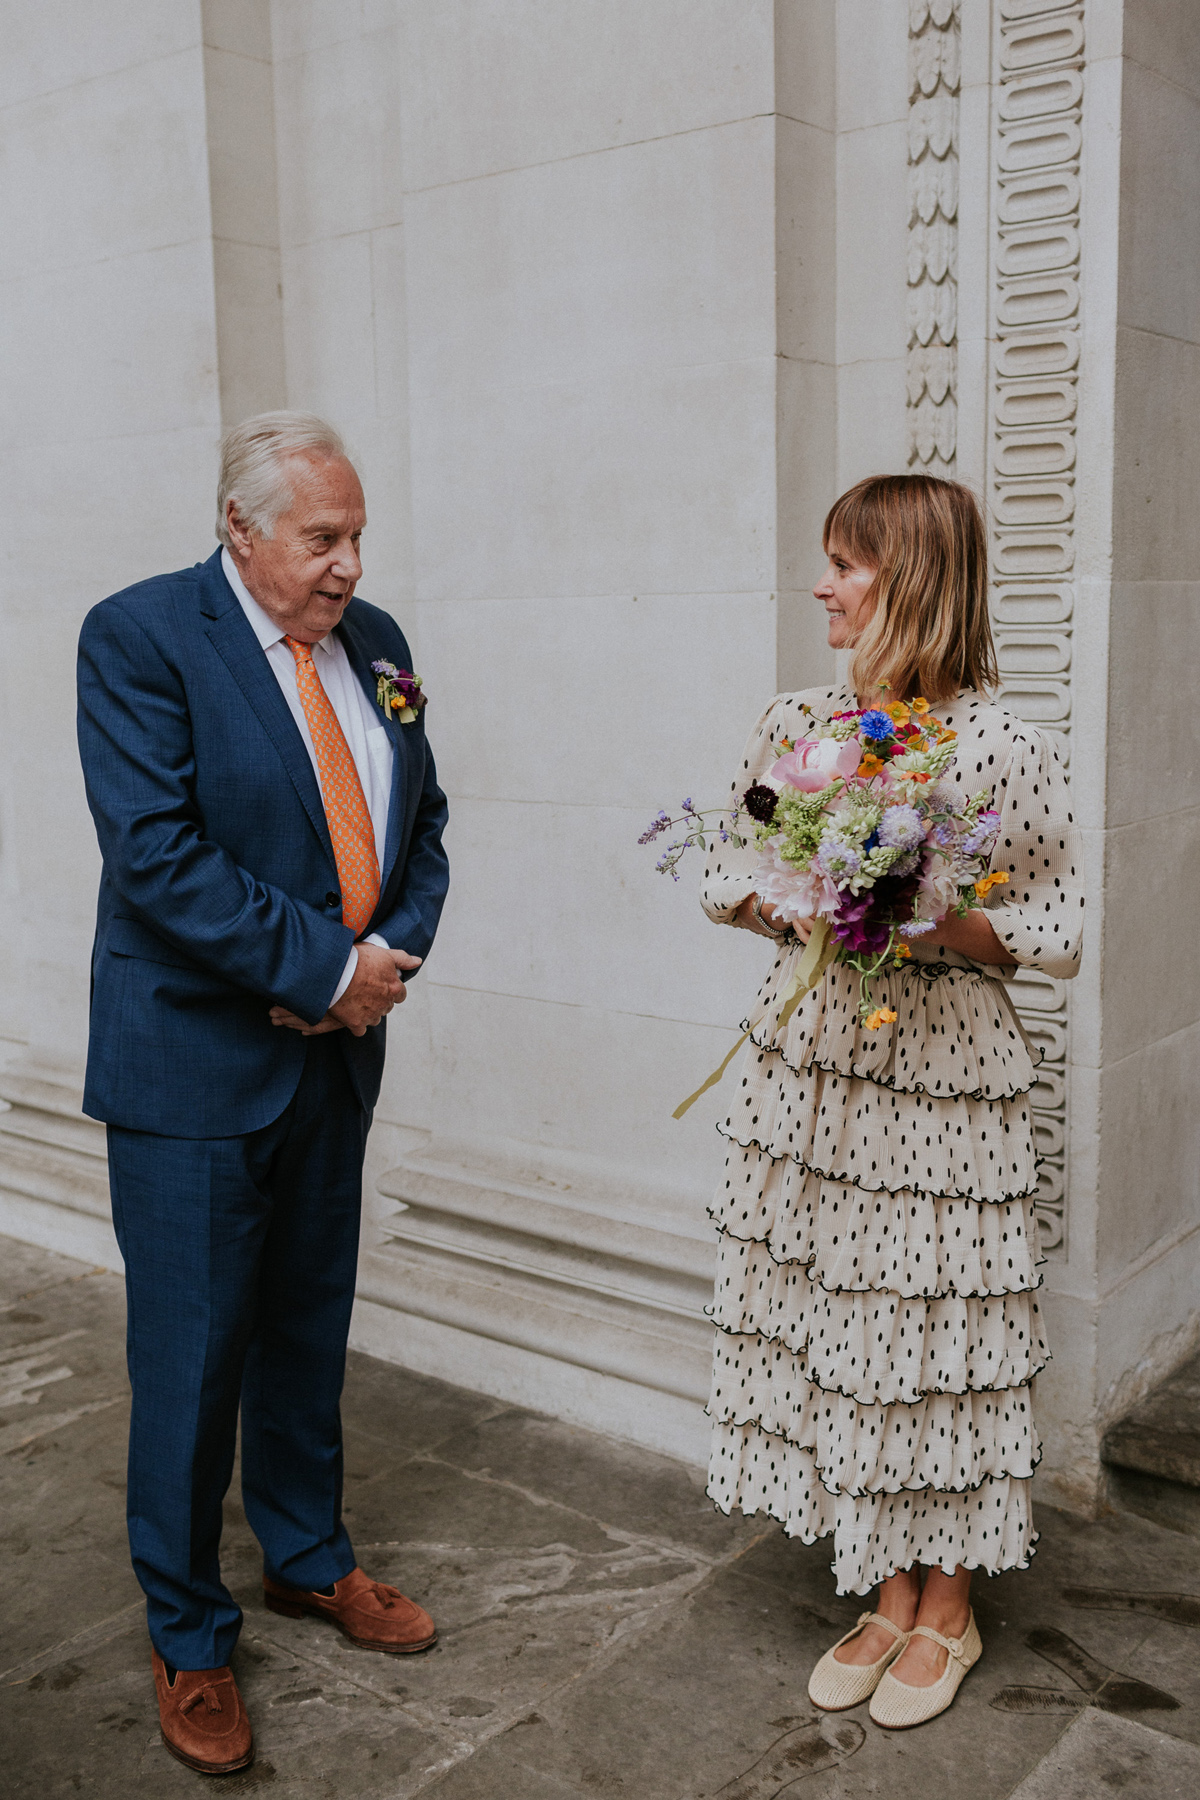 Polka dot dress intimate London wedding  - A Ruffled Polka Dot Dress and Vintage Wicker Bag for an Intimate, Rainy Day London Wedding with Afternoon Tea